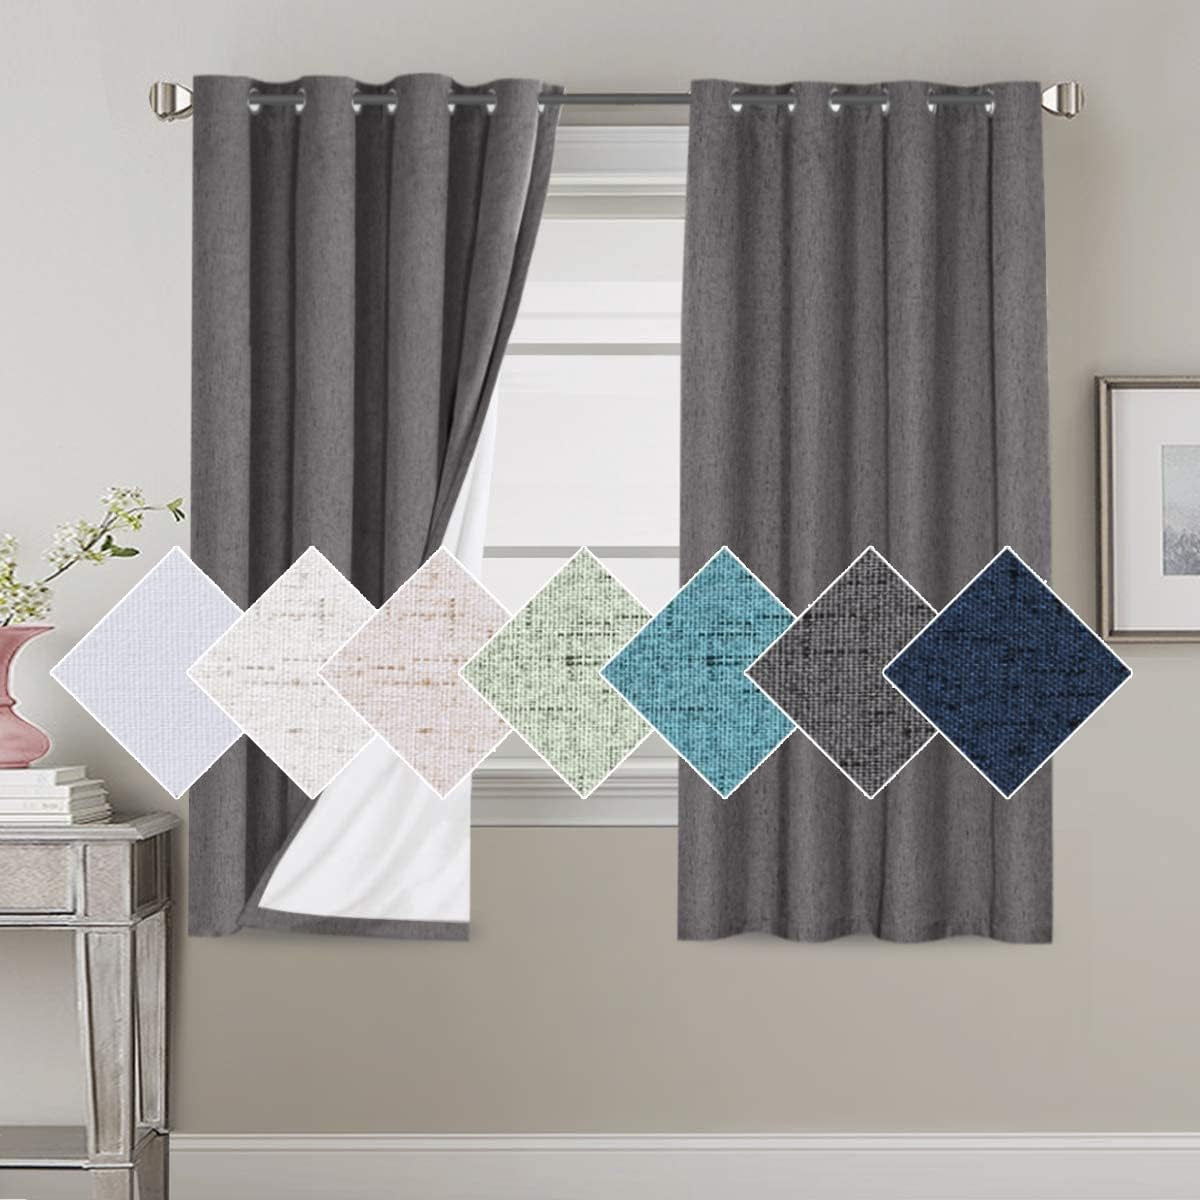 H.VERSAILTEX 100% Blackout Curtains for Bedroom Thermal Insulated Linen Textured Curtains Heat and Full Light Blocking Drapes Living Room Curtains 2 Panel Sets, 52X84 - Inch, Natural  H.VERSAILTEX Grey 2 Panel - 52"W X 63"L 